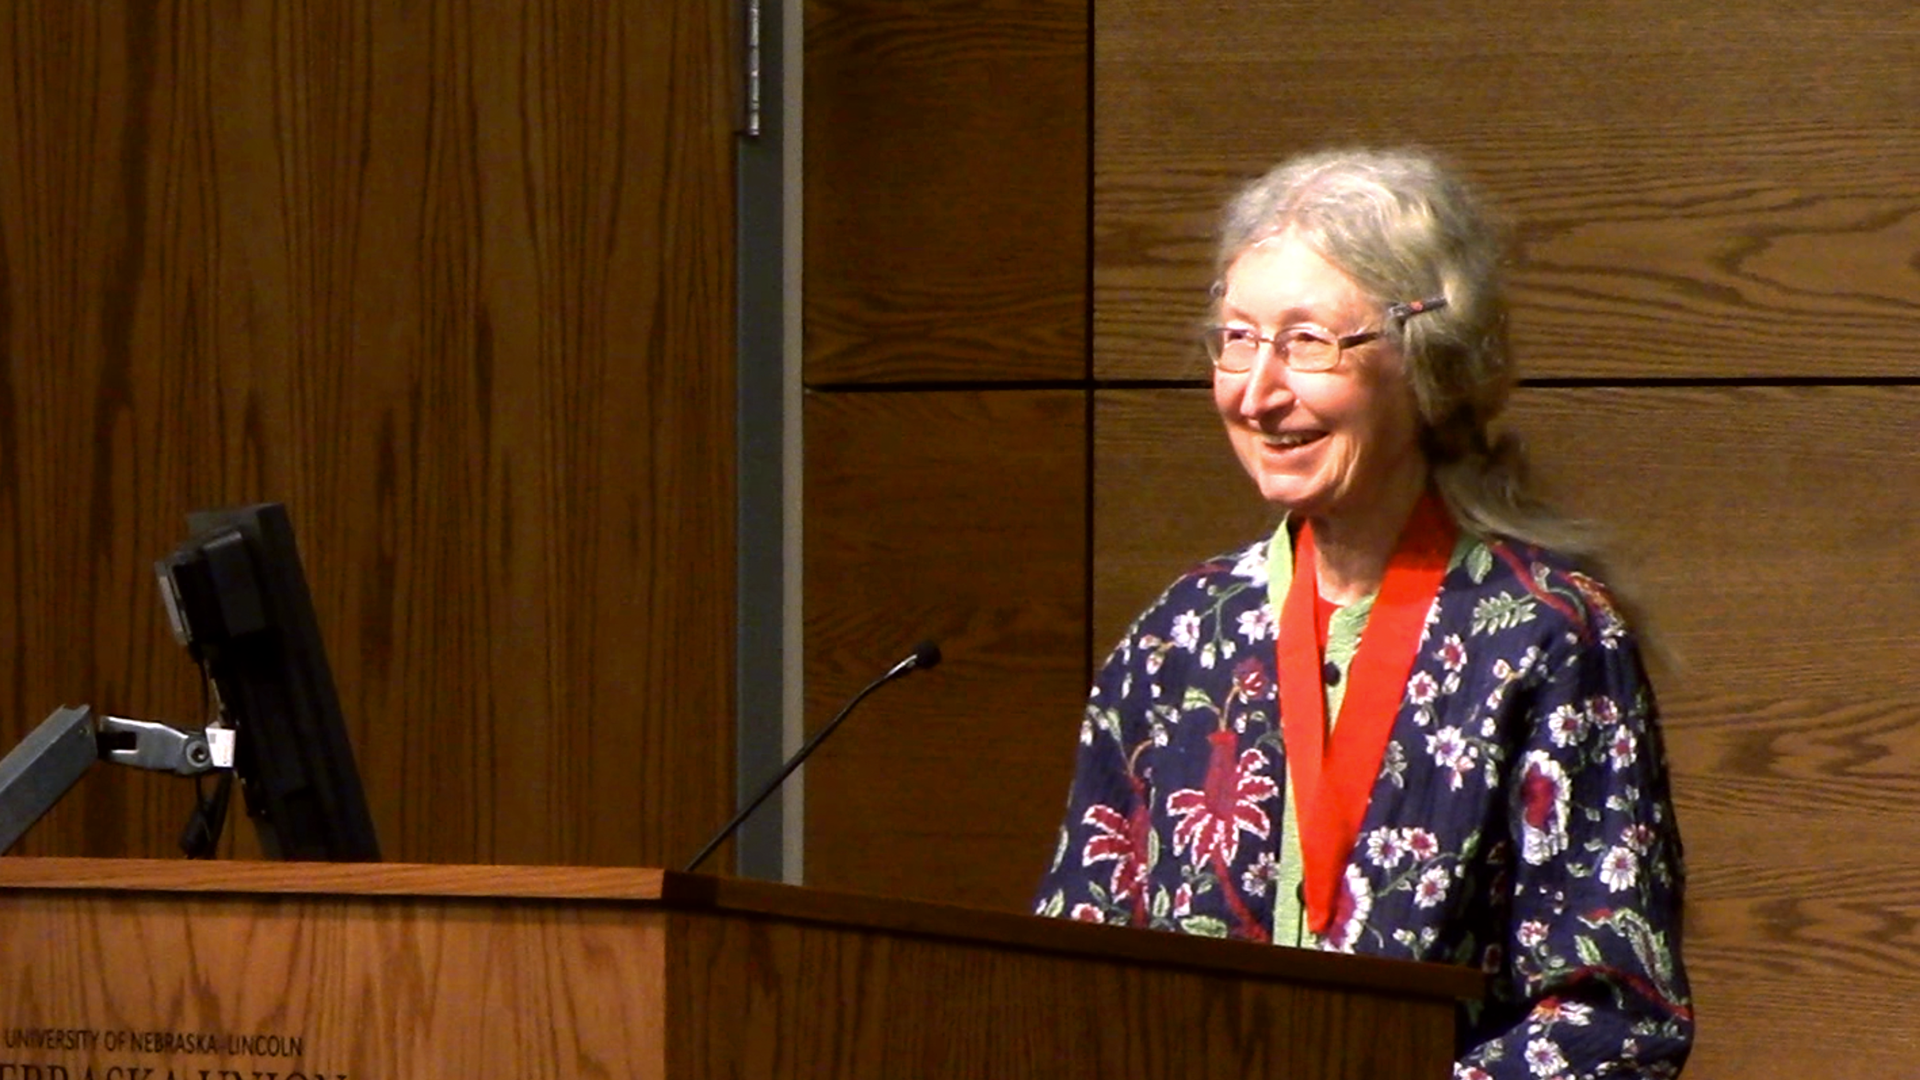 Fran Kaye speaks at the Faculty Senate meeting on April 26; links to news story